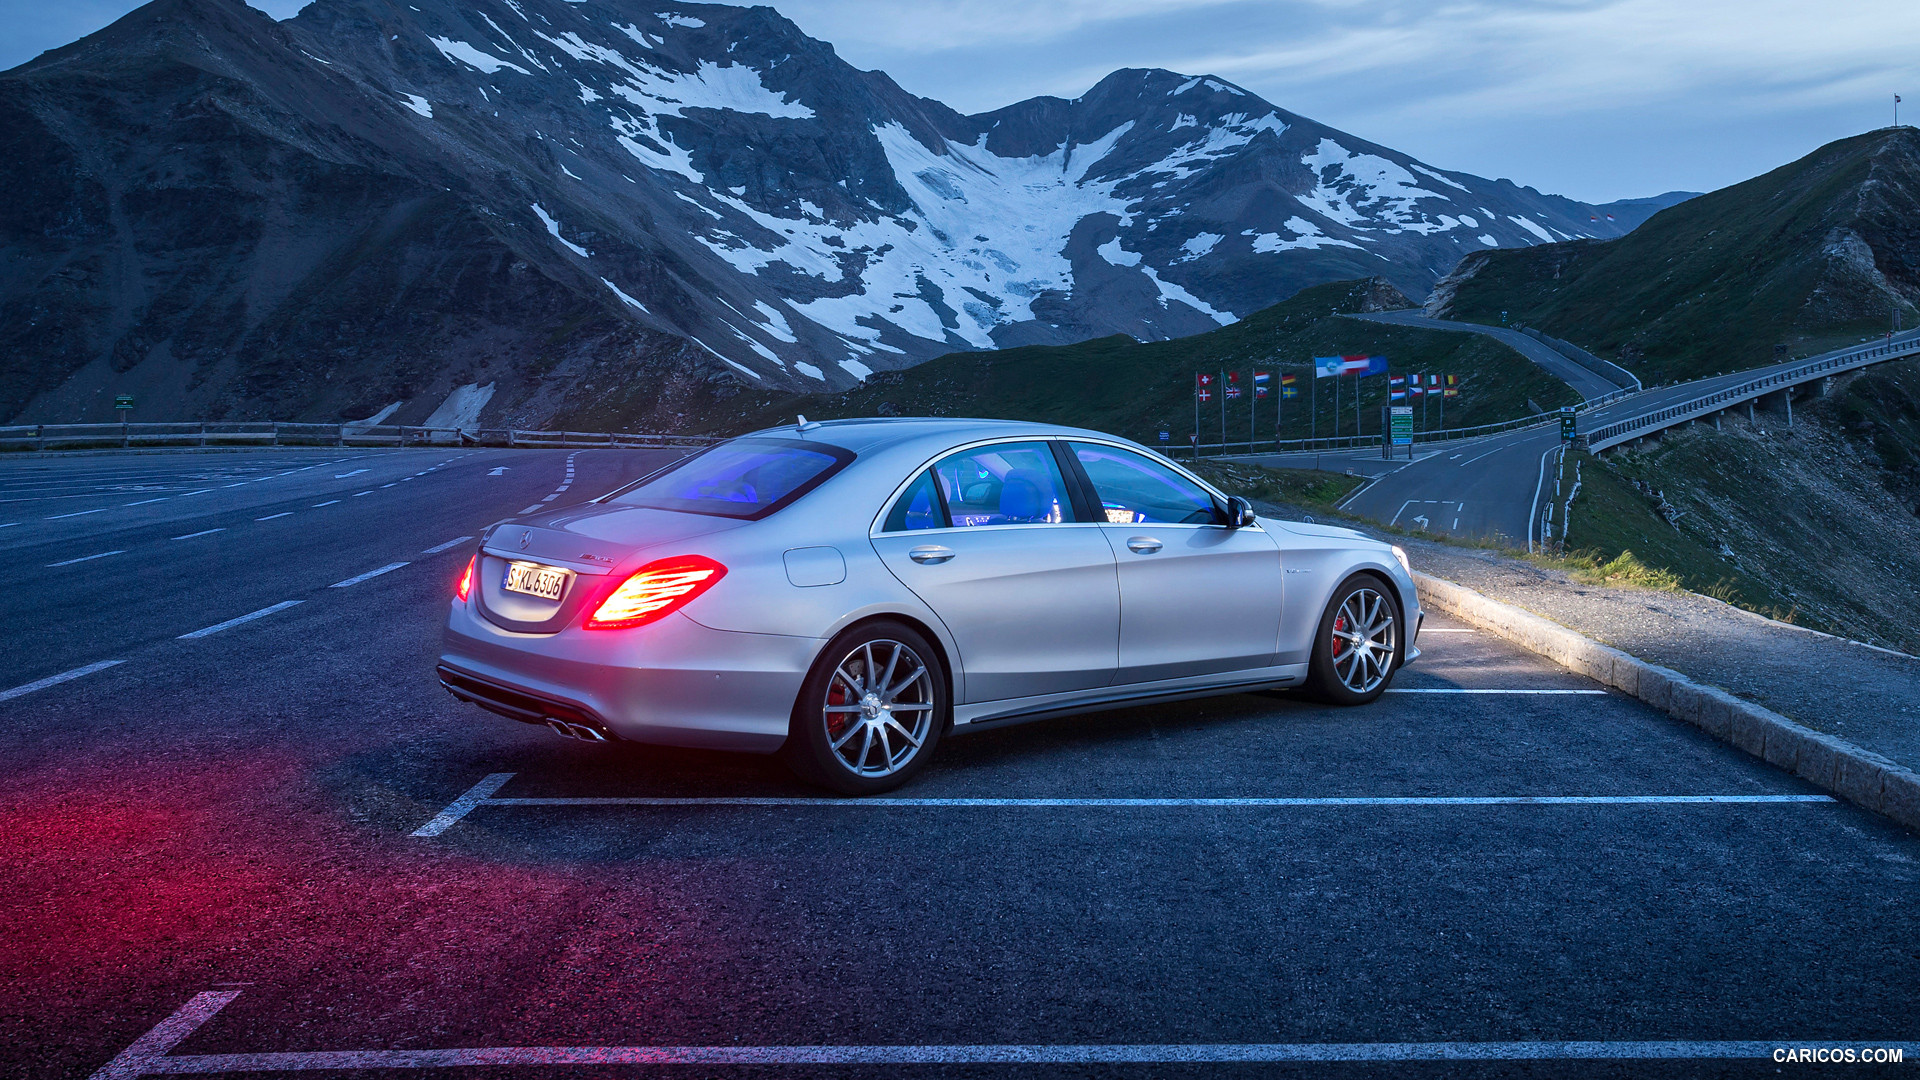 Mercedes-Benz S63 AMG W222 (2014)  - Side, #29 of 102